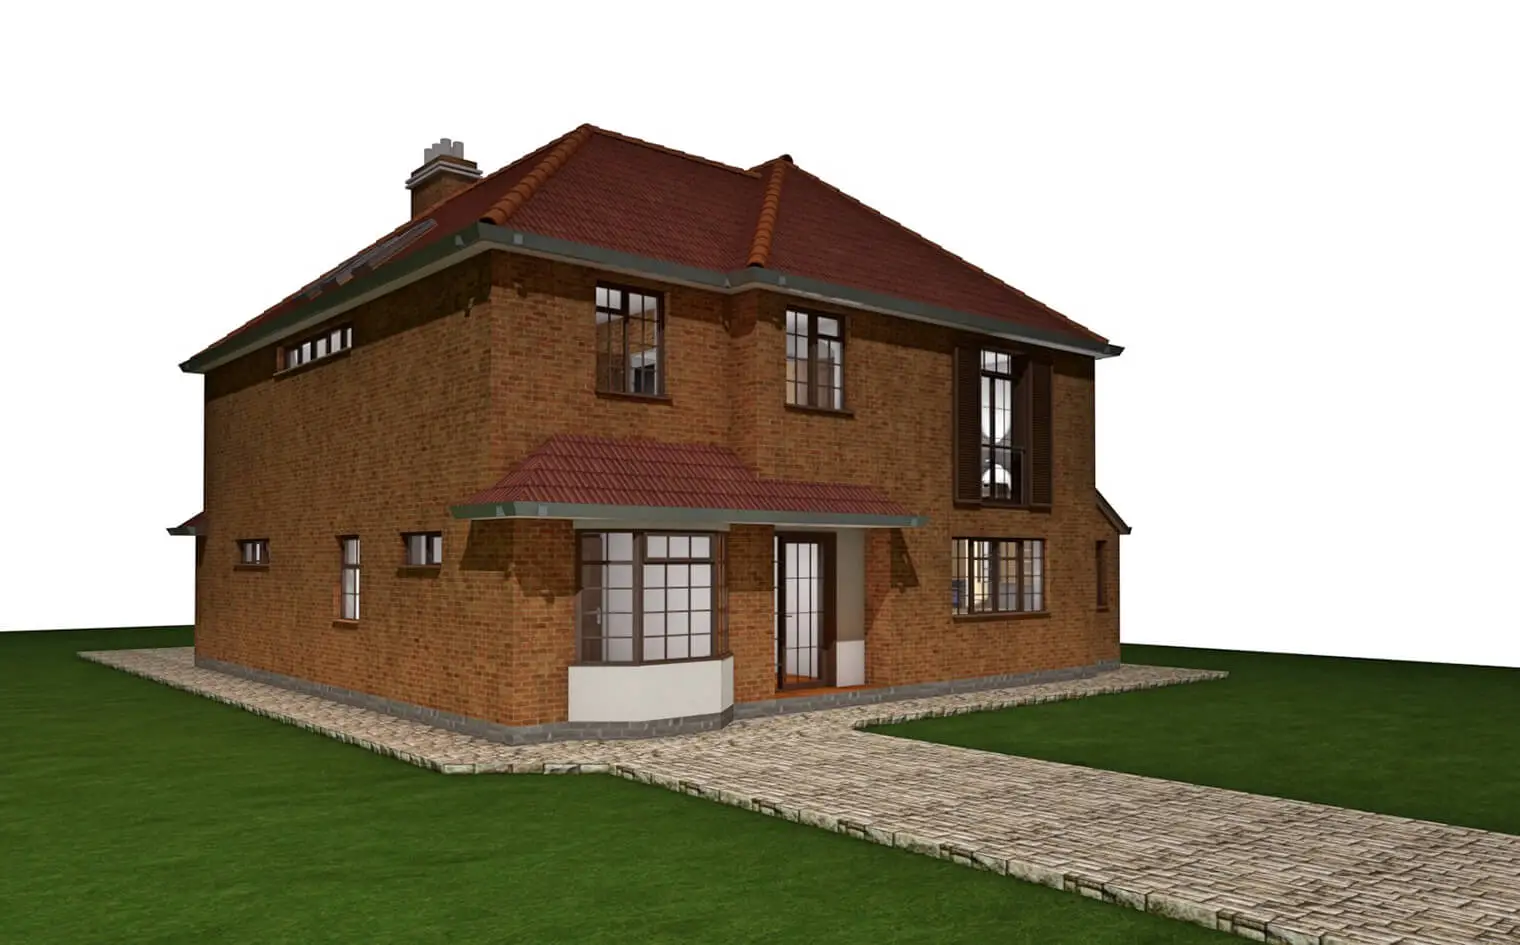 3D architectural drawing of detached home